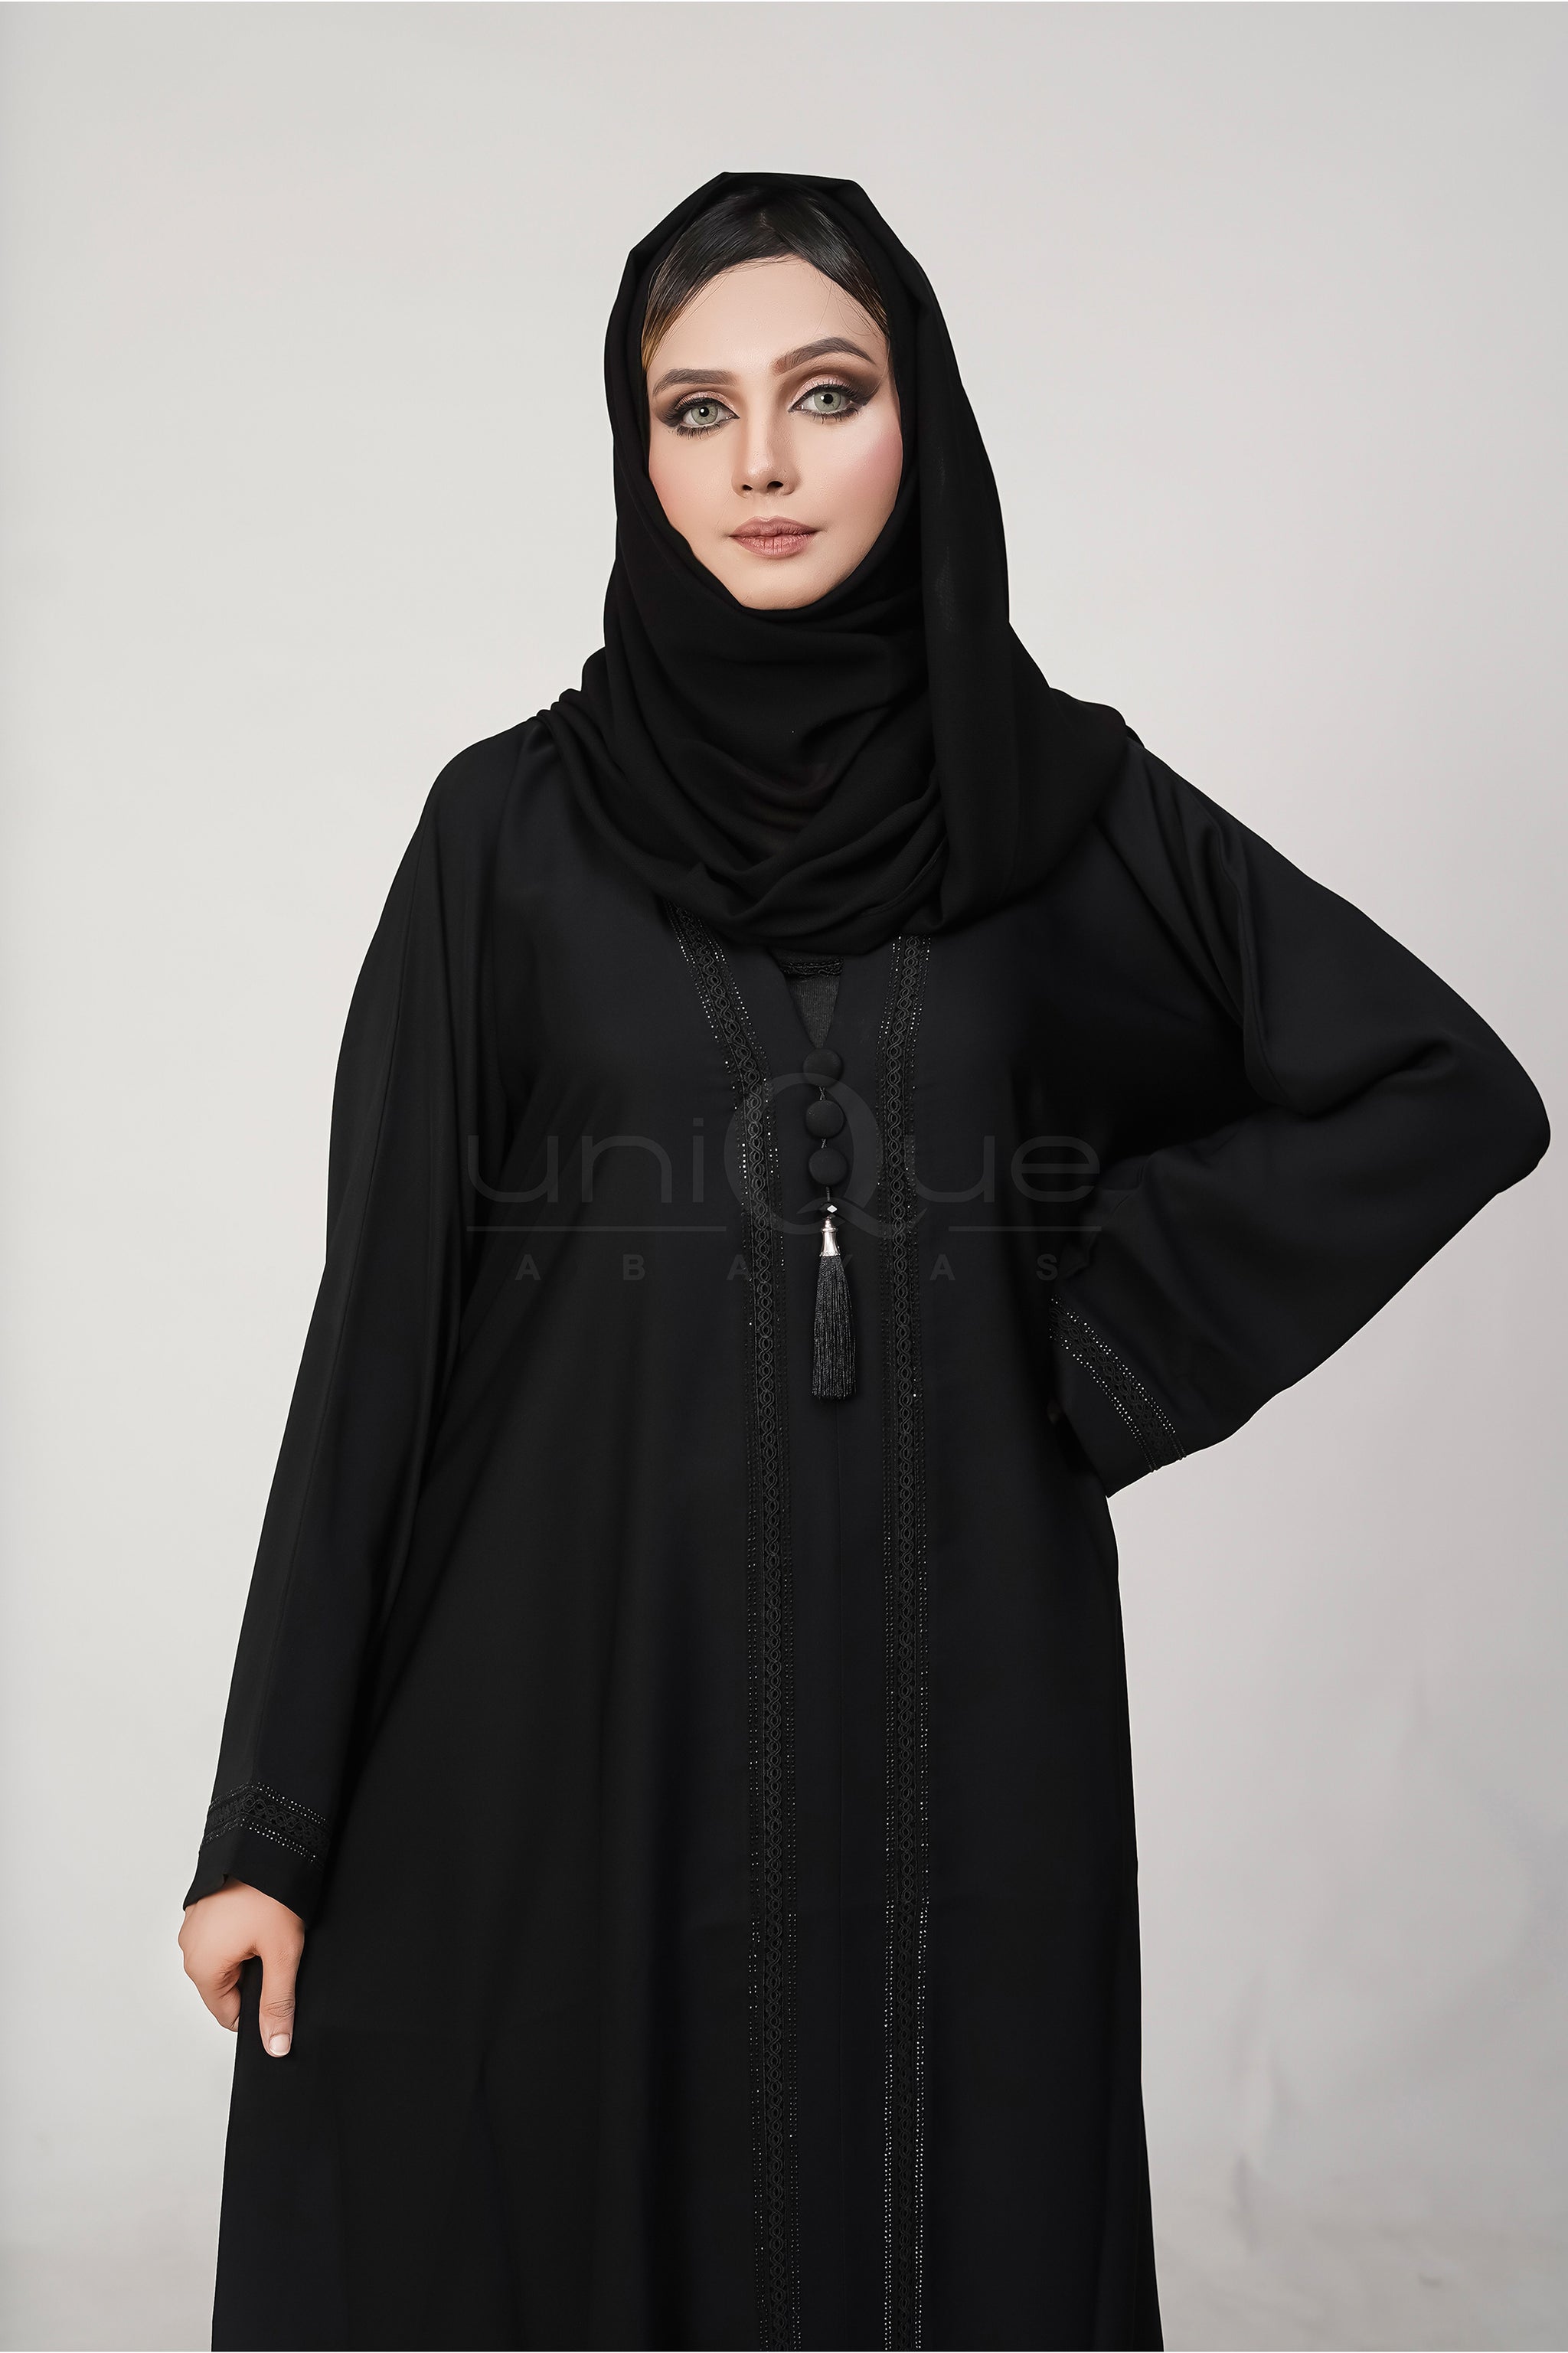 Lace Tassel Black Abaya by Uniquewallart Abaya for Women, Front Side Detailed View